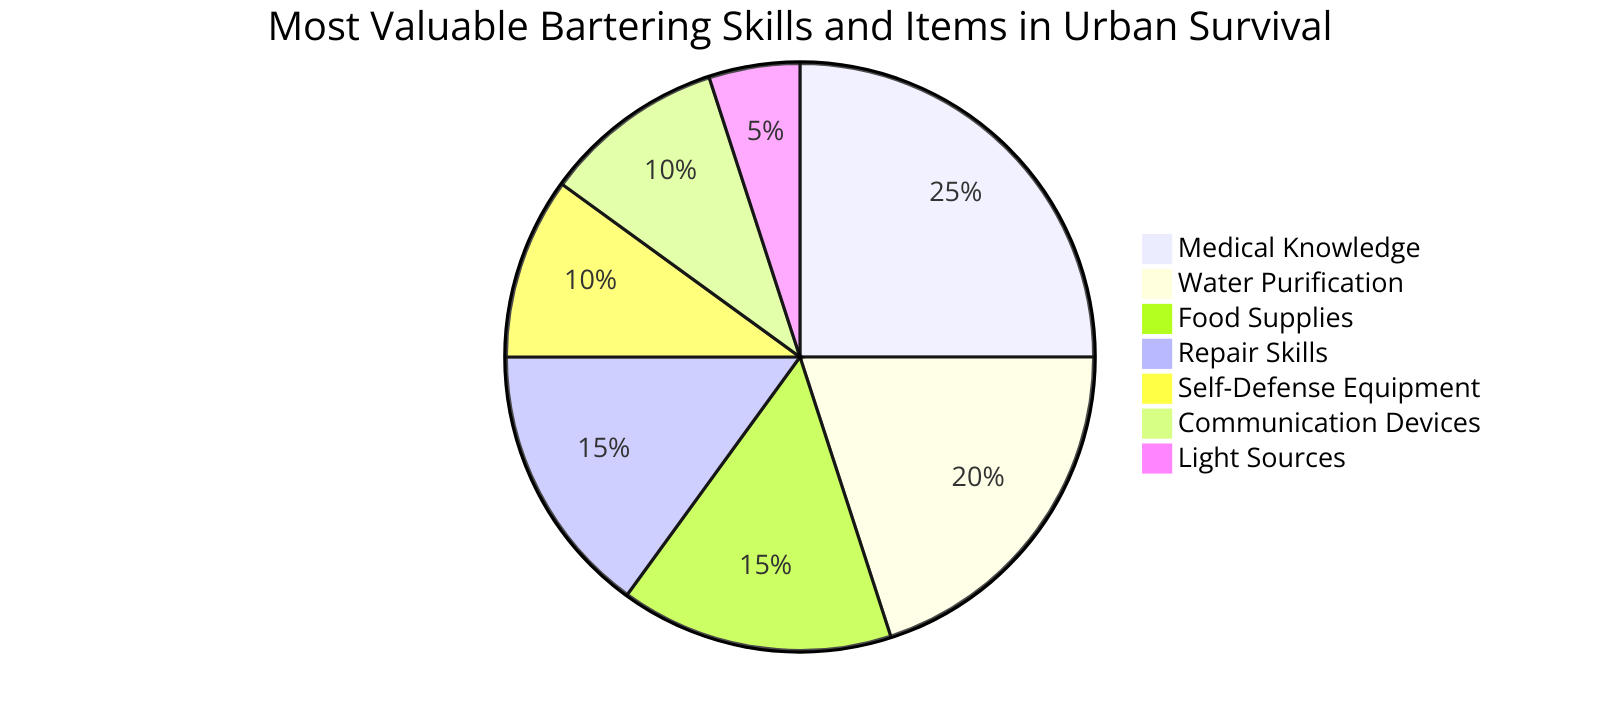  the most valuable skills and items for bartering in an urban survival context, based on feedback from experienced urban survivors